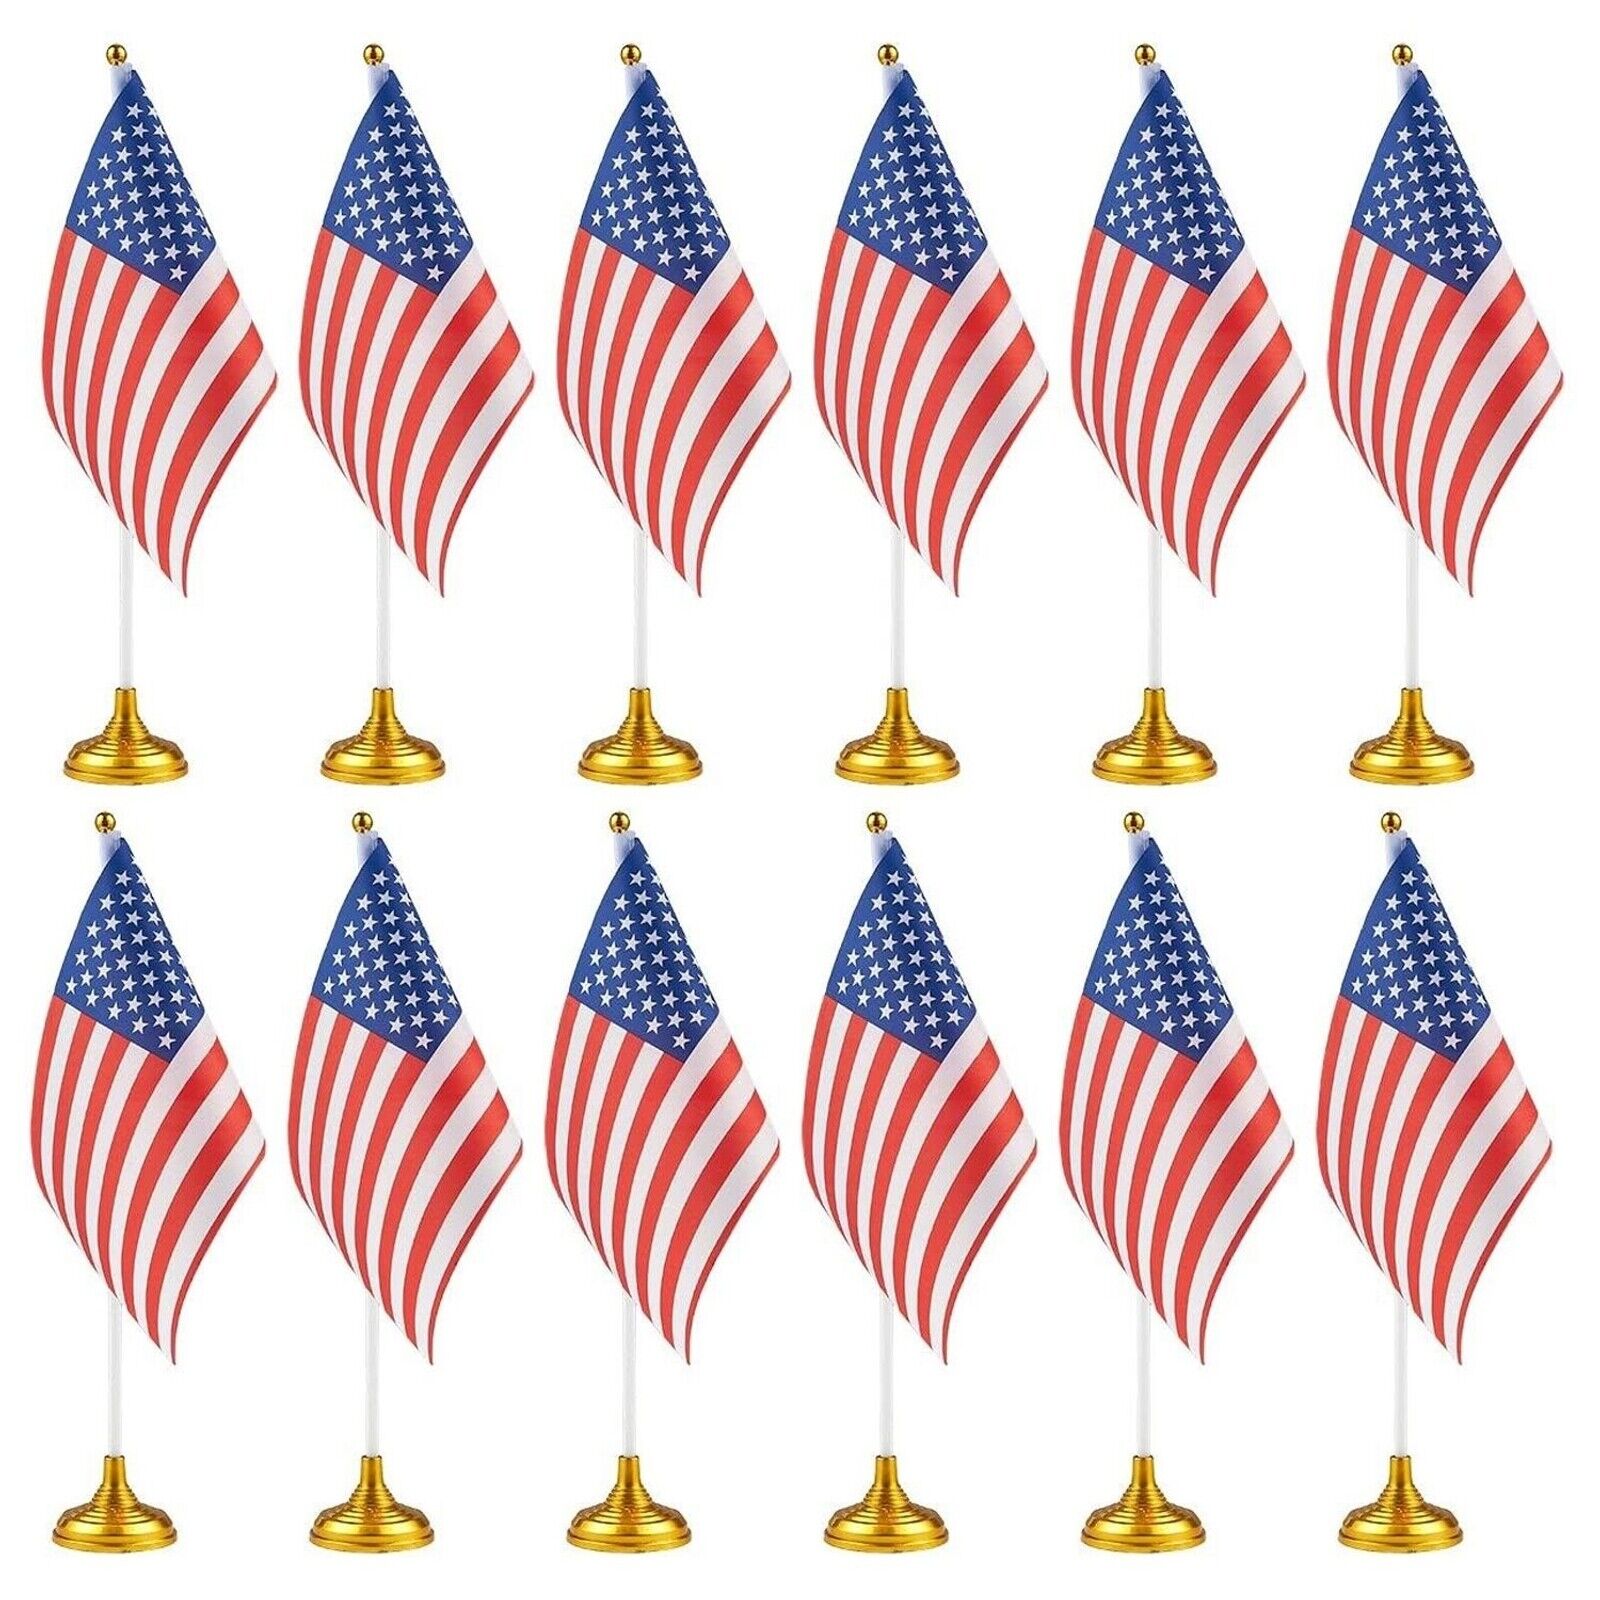 12 Pack Patriotic Mini American Flags with Stands for 4th of July Party, 8x5 in